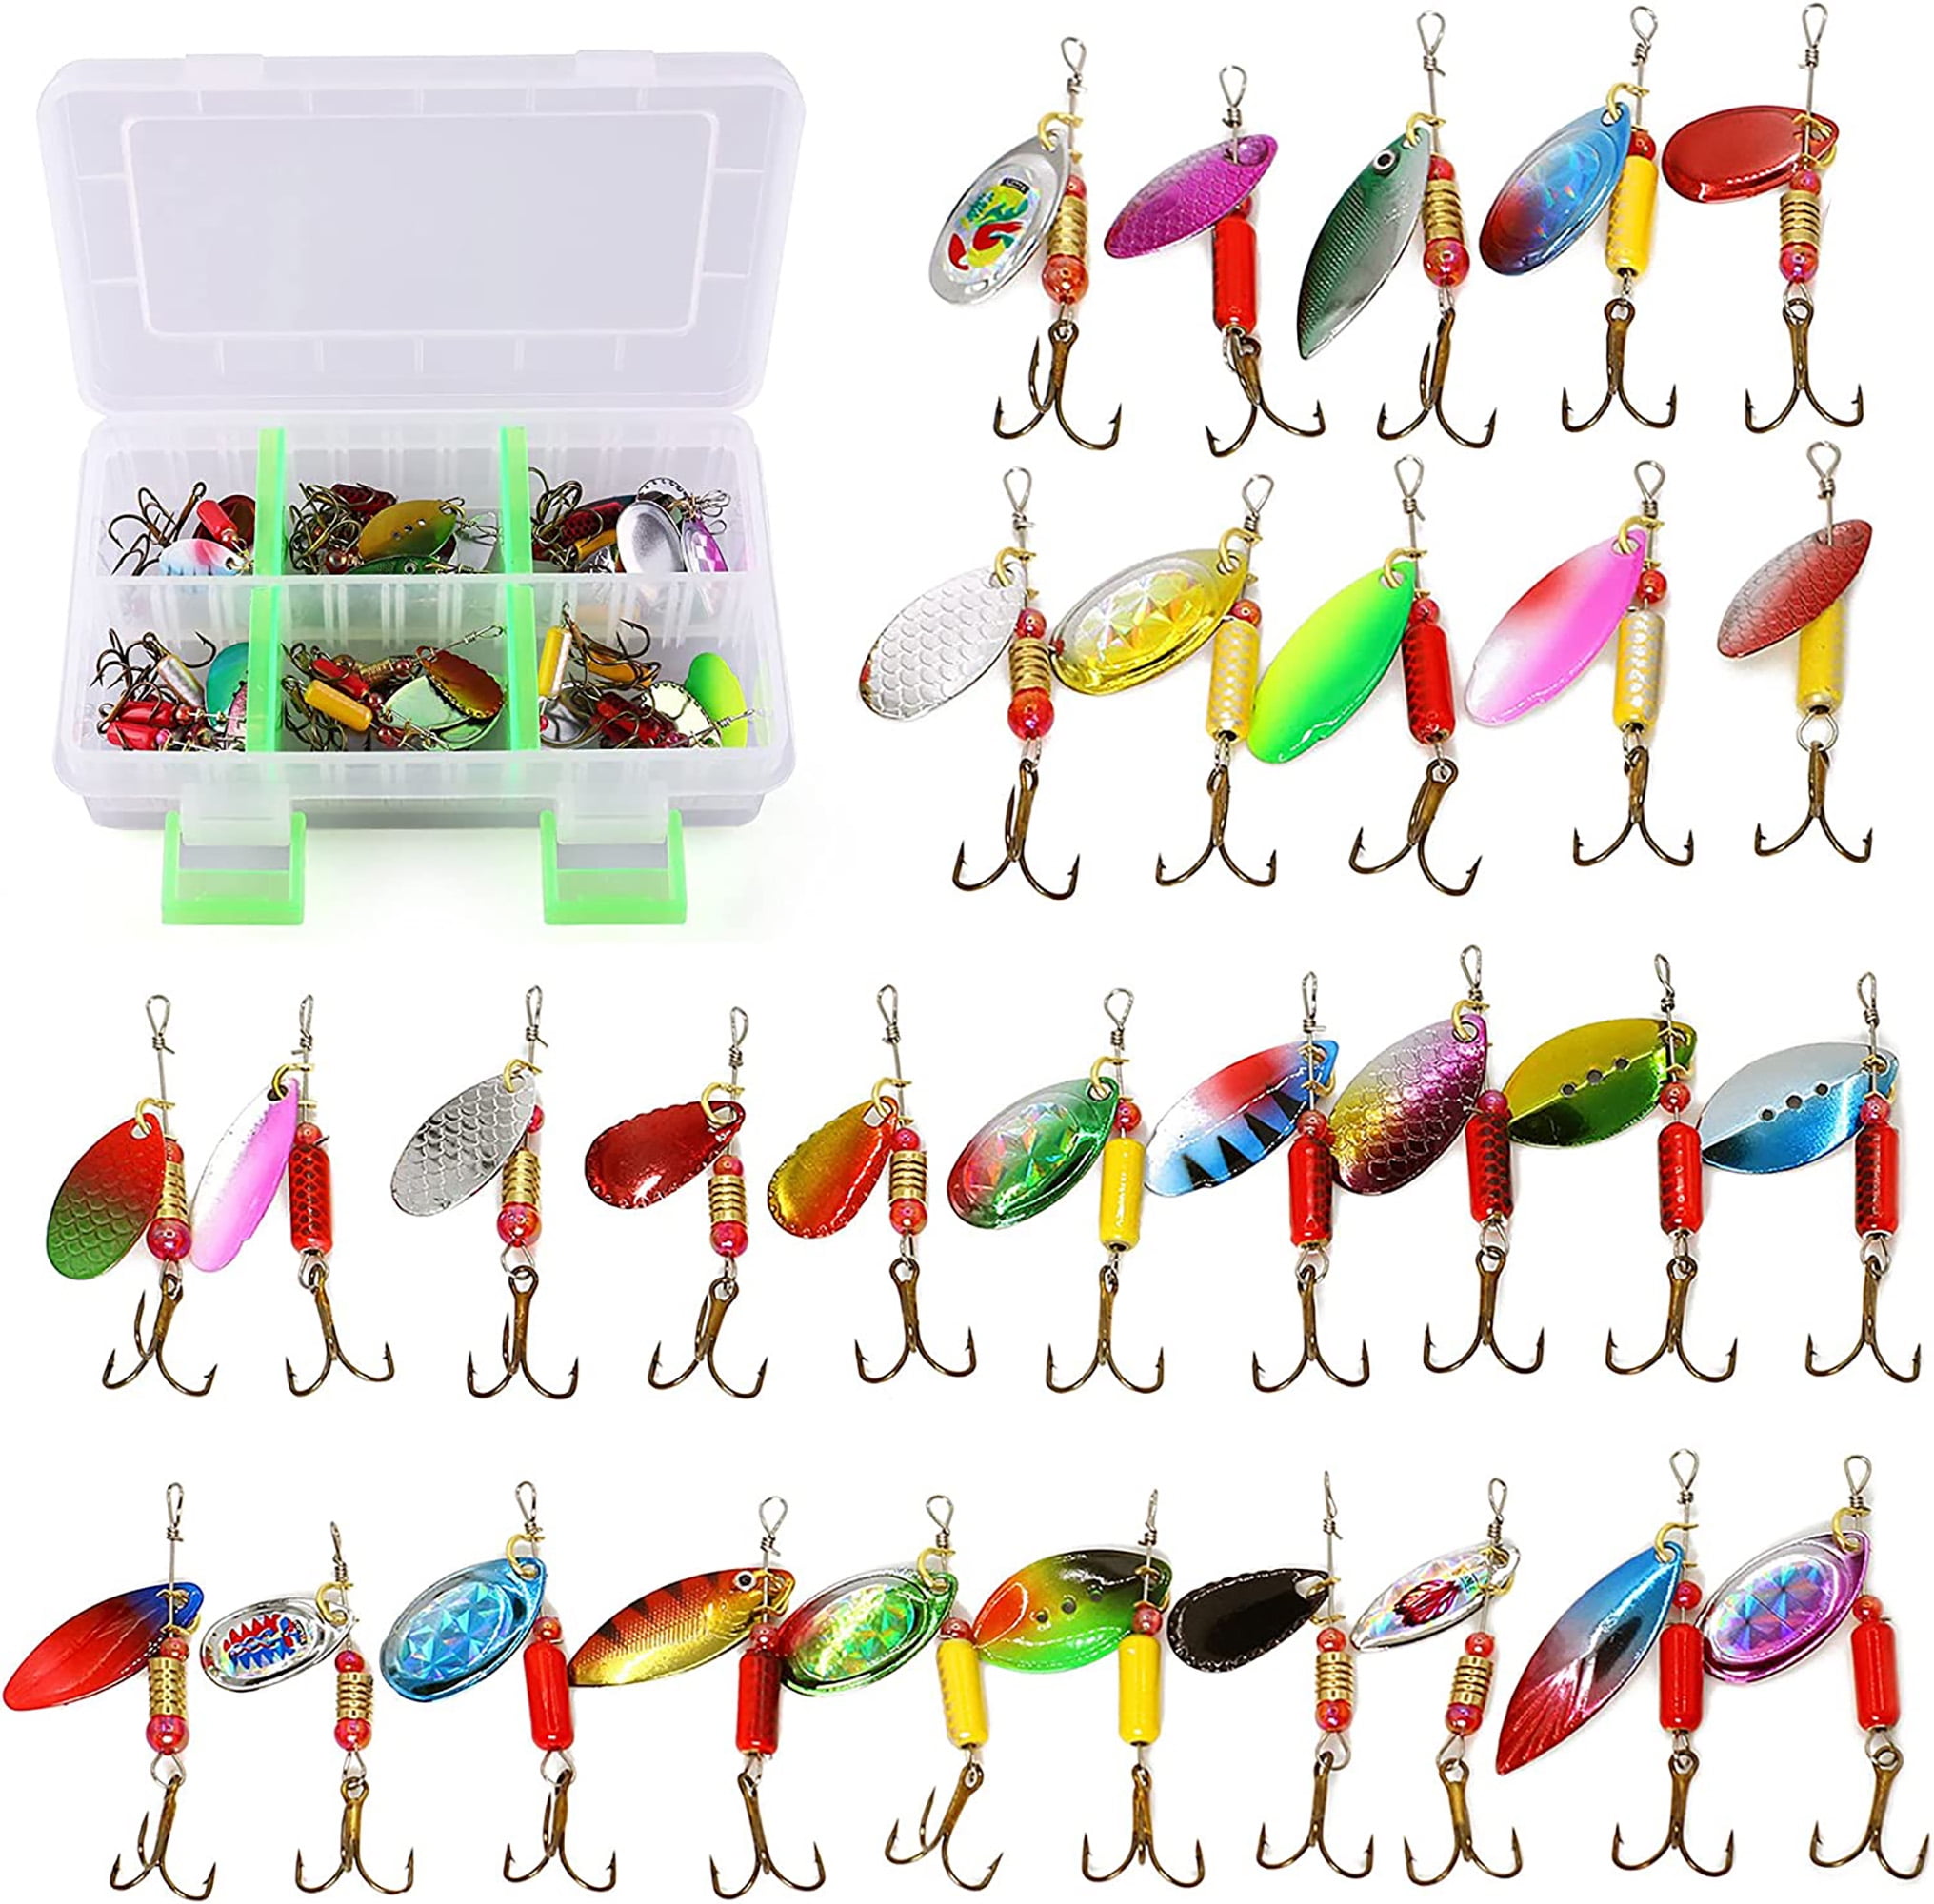 LotFancy Fishing Lures Kit, 30 Spinner Baits with Tackle Box, Hard